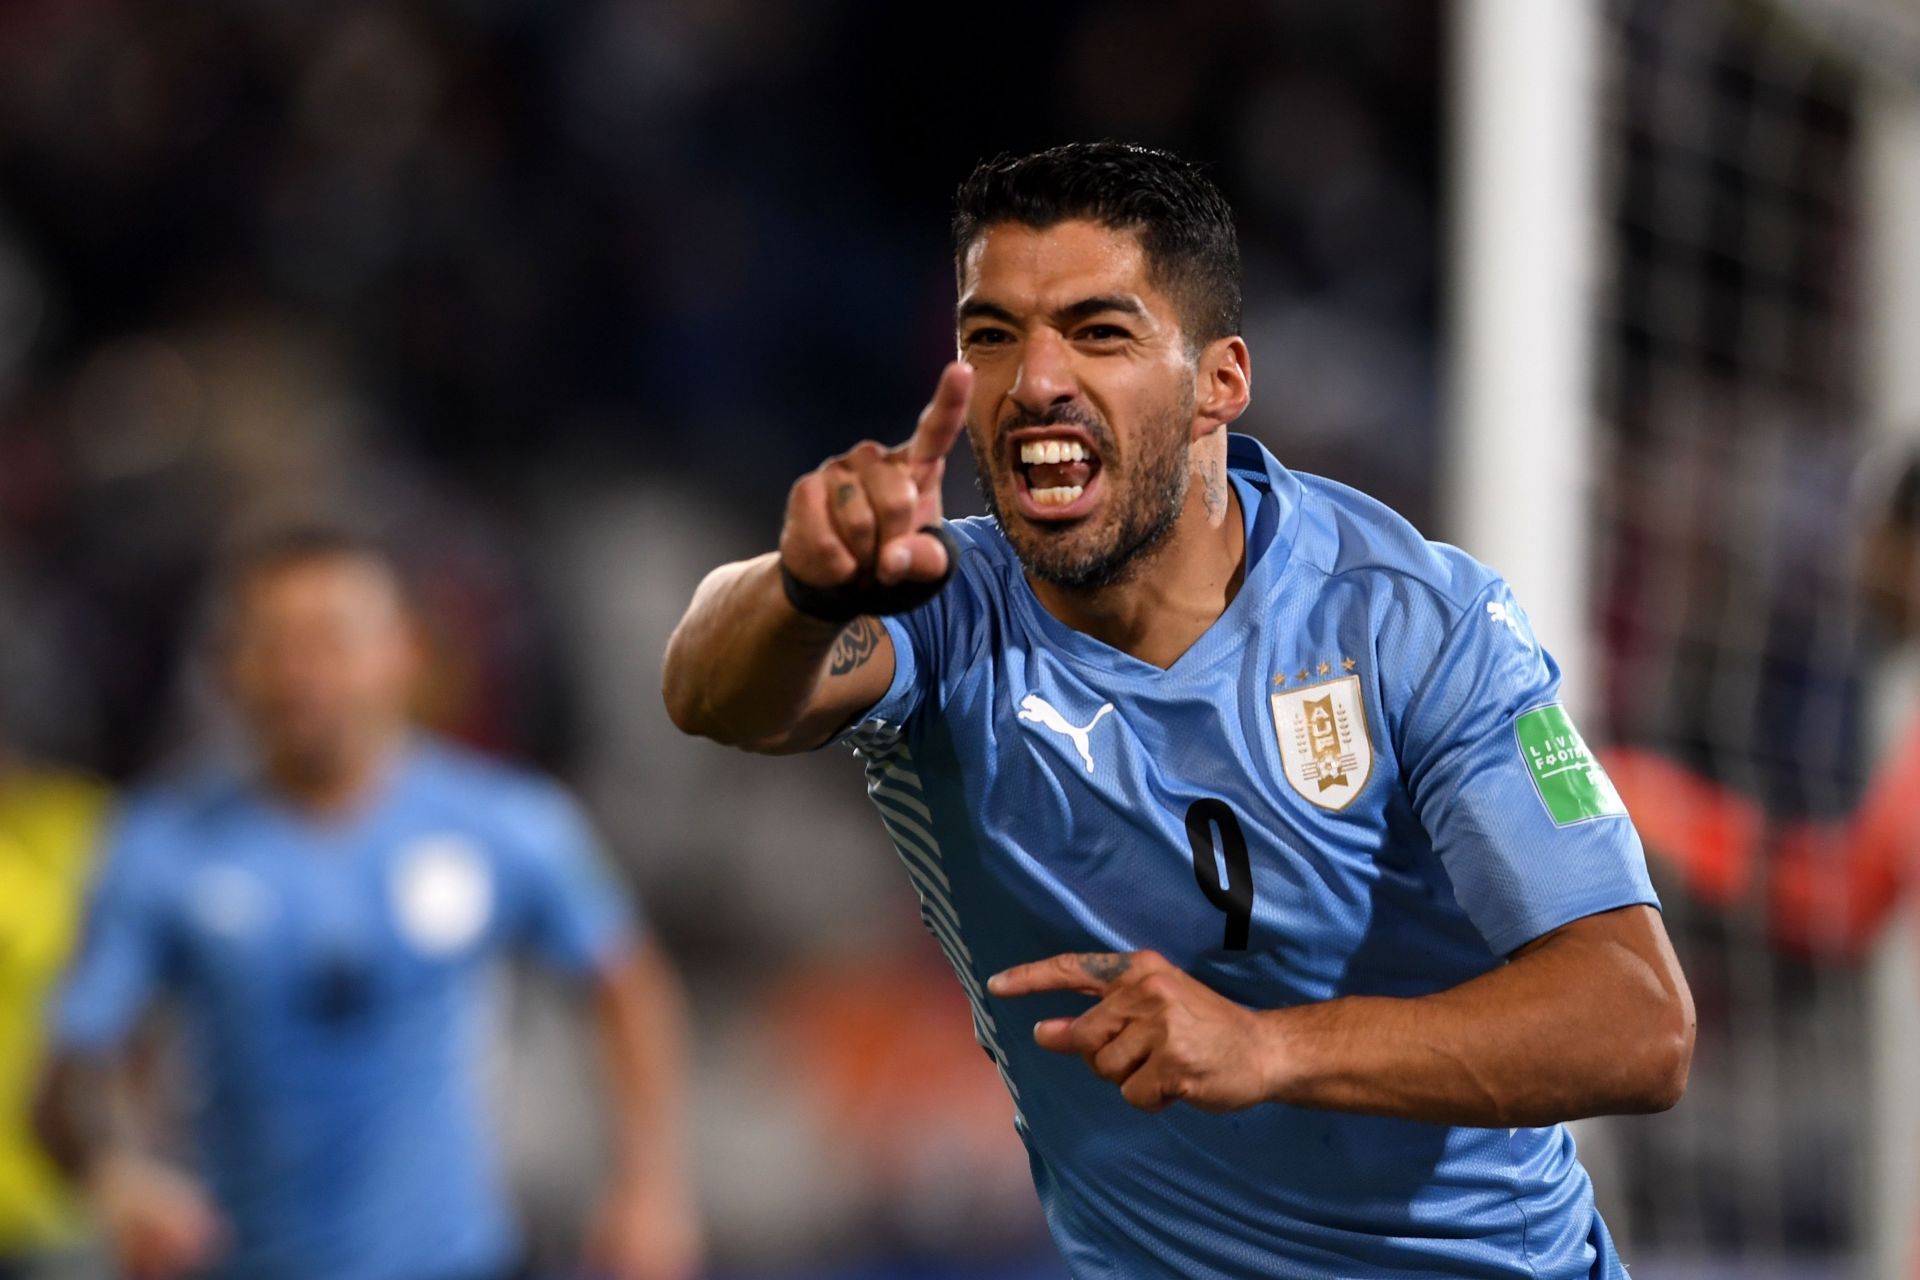 Luis Suarez is not just a leading footballer in South America but at the global level also